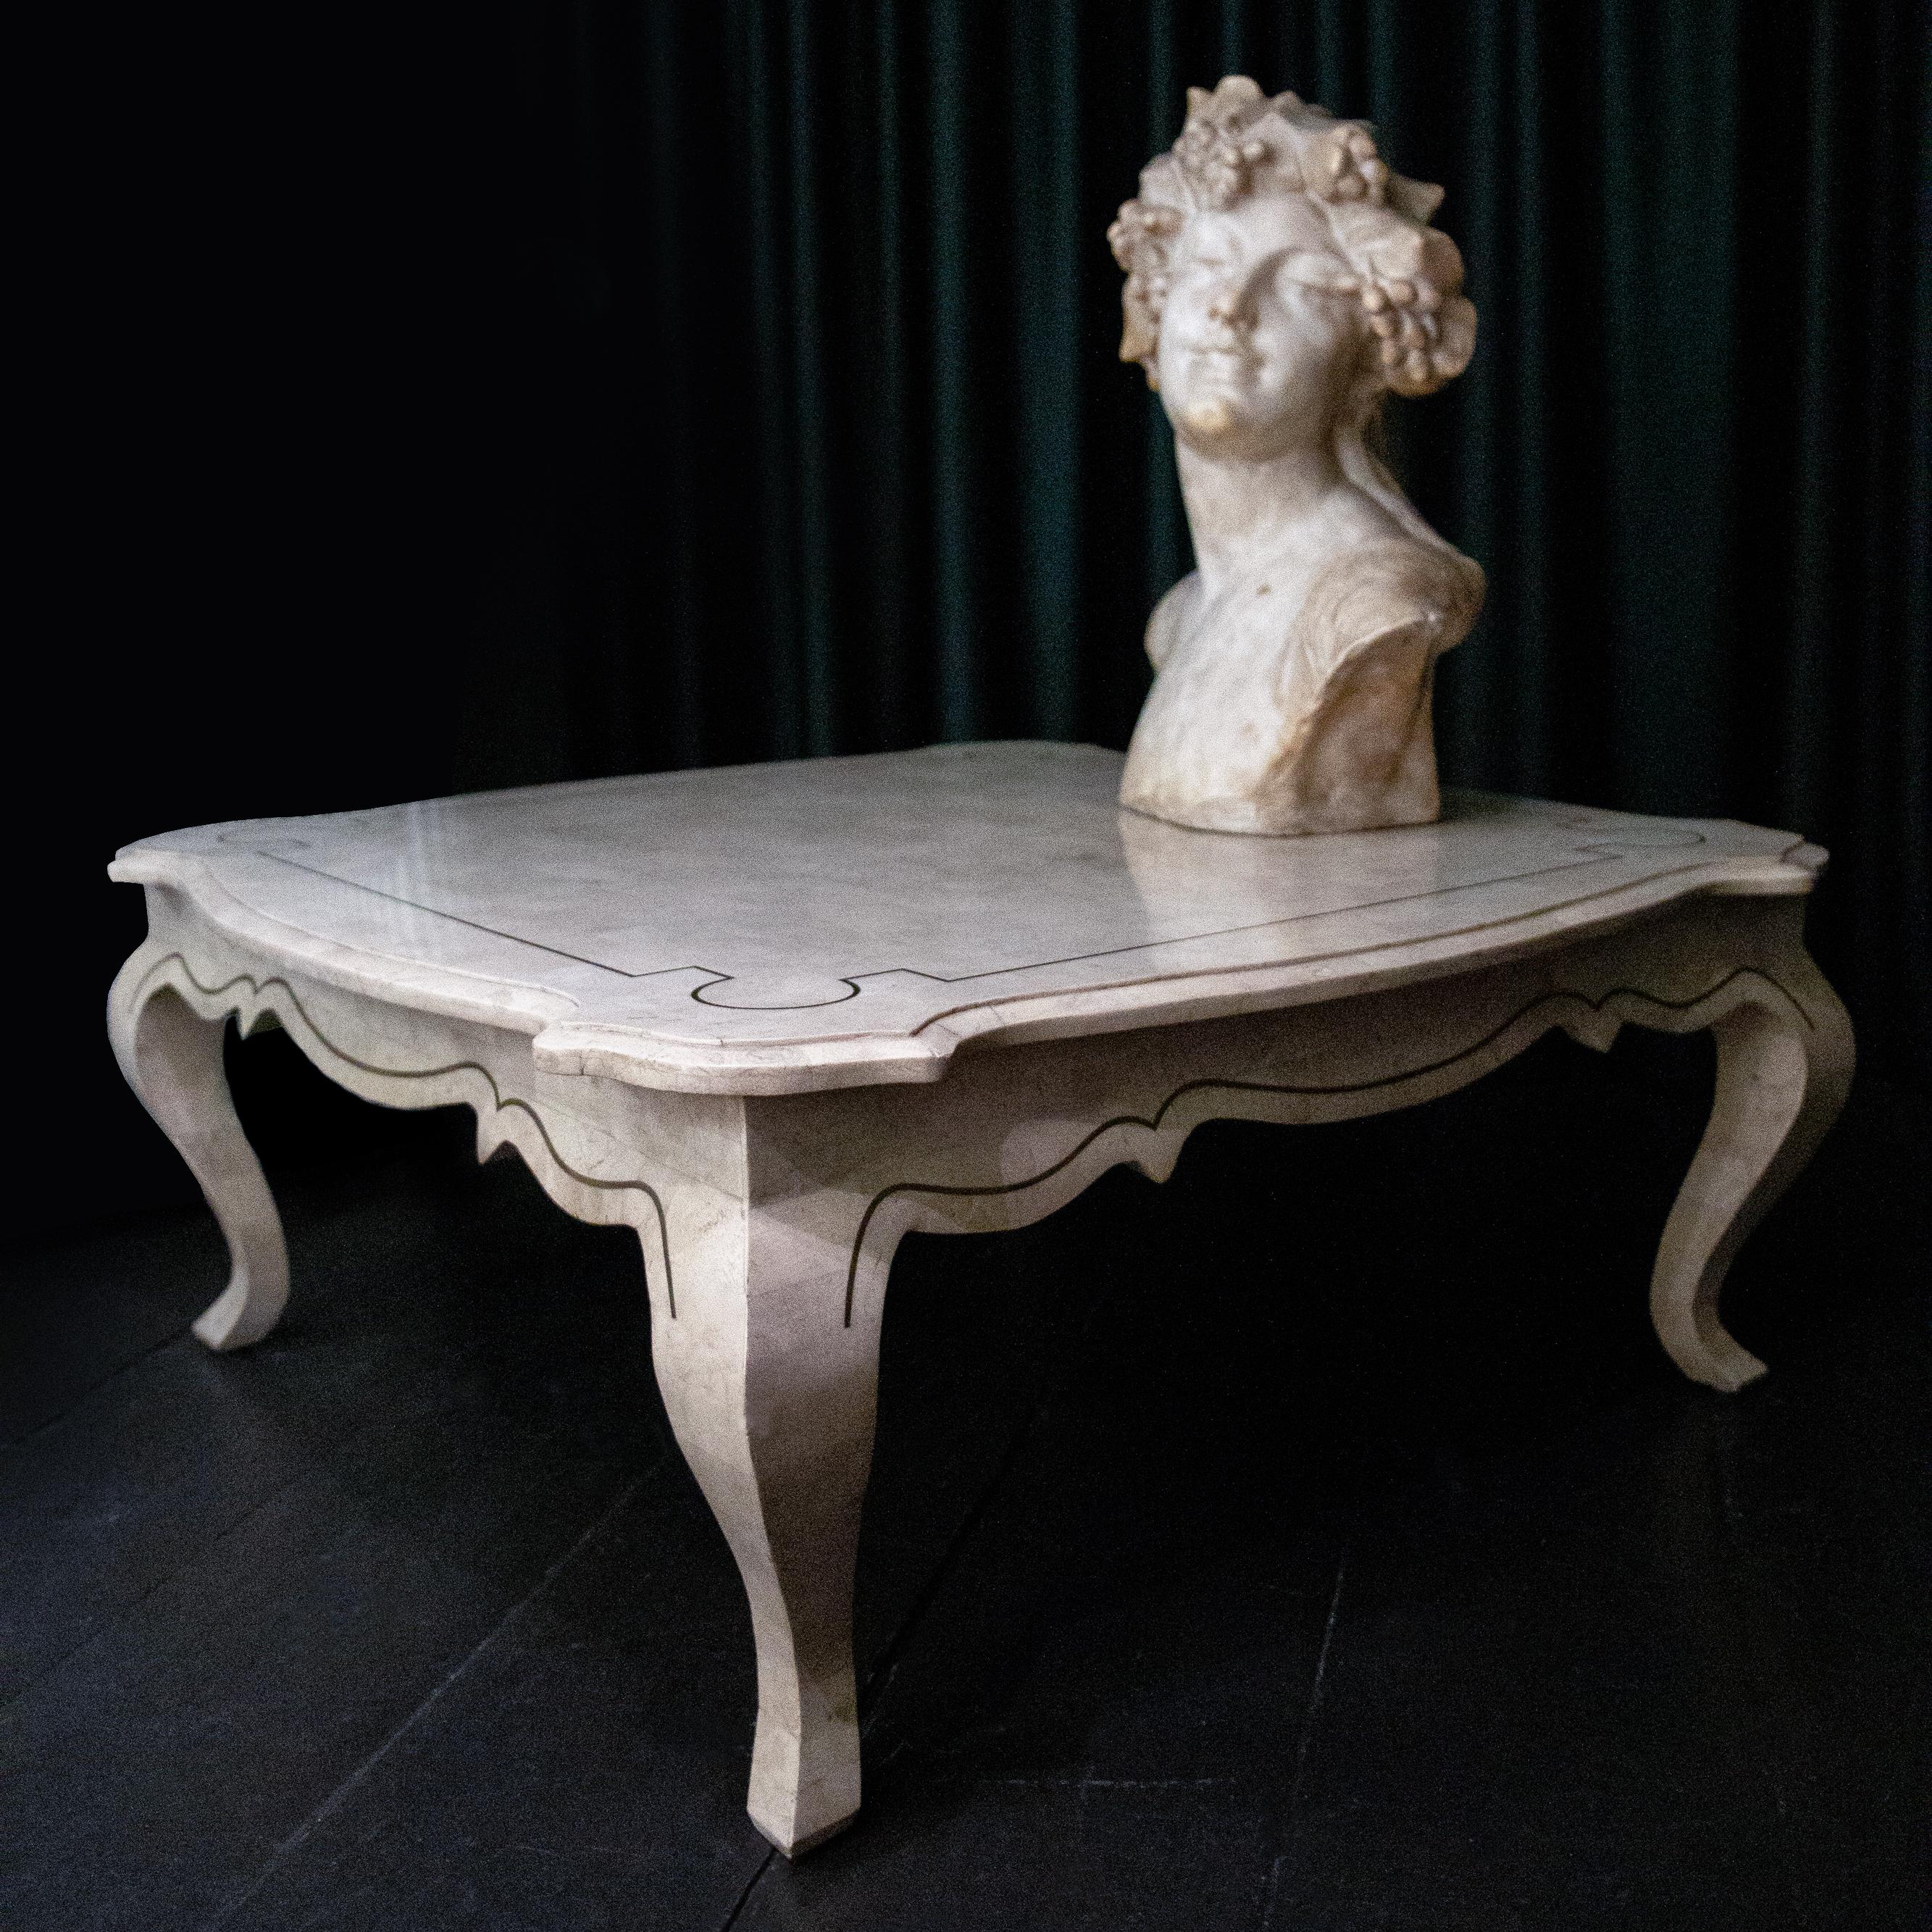 Late 20th Century Maison Jansen Attributed Resin Contour Coffee Table, Late Production, Paris 1980